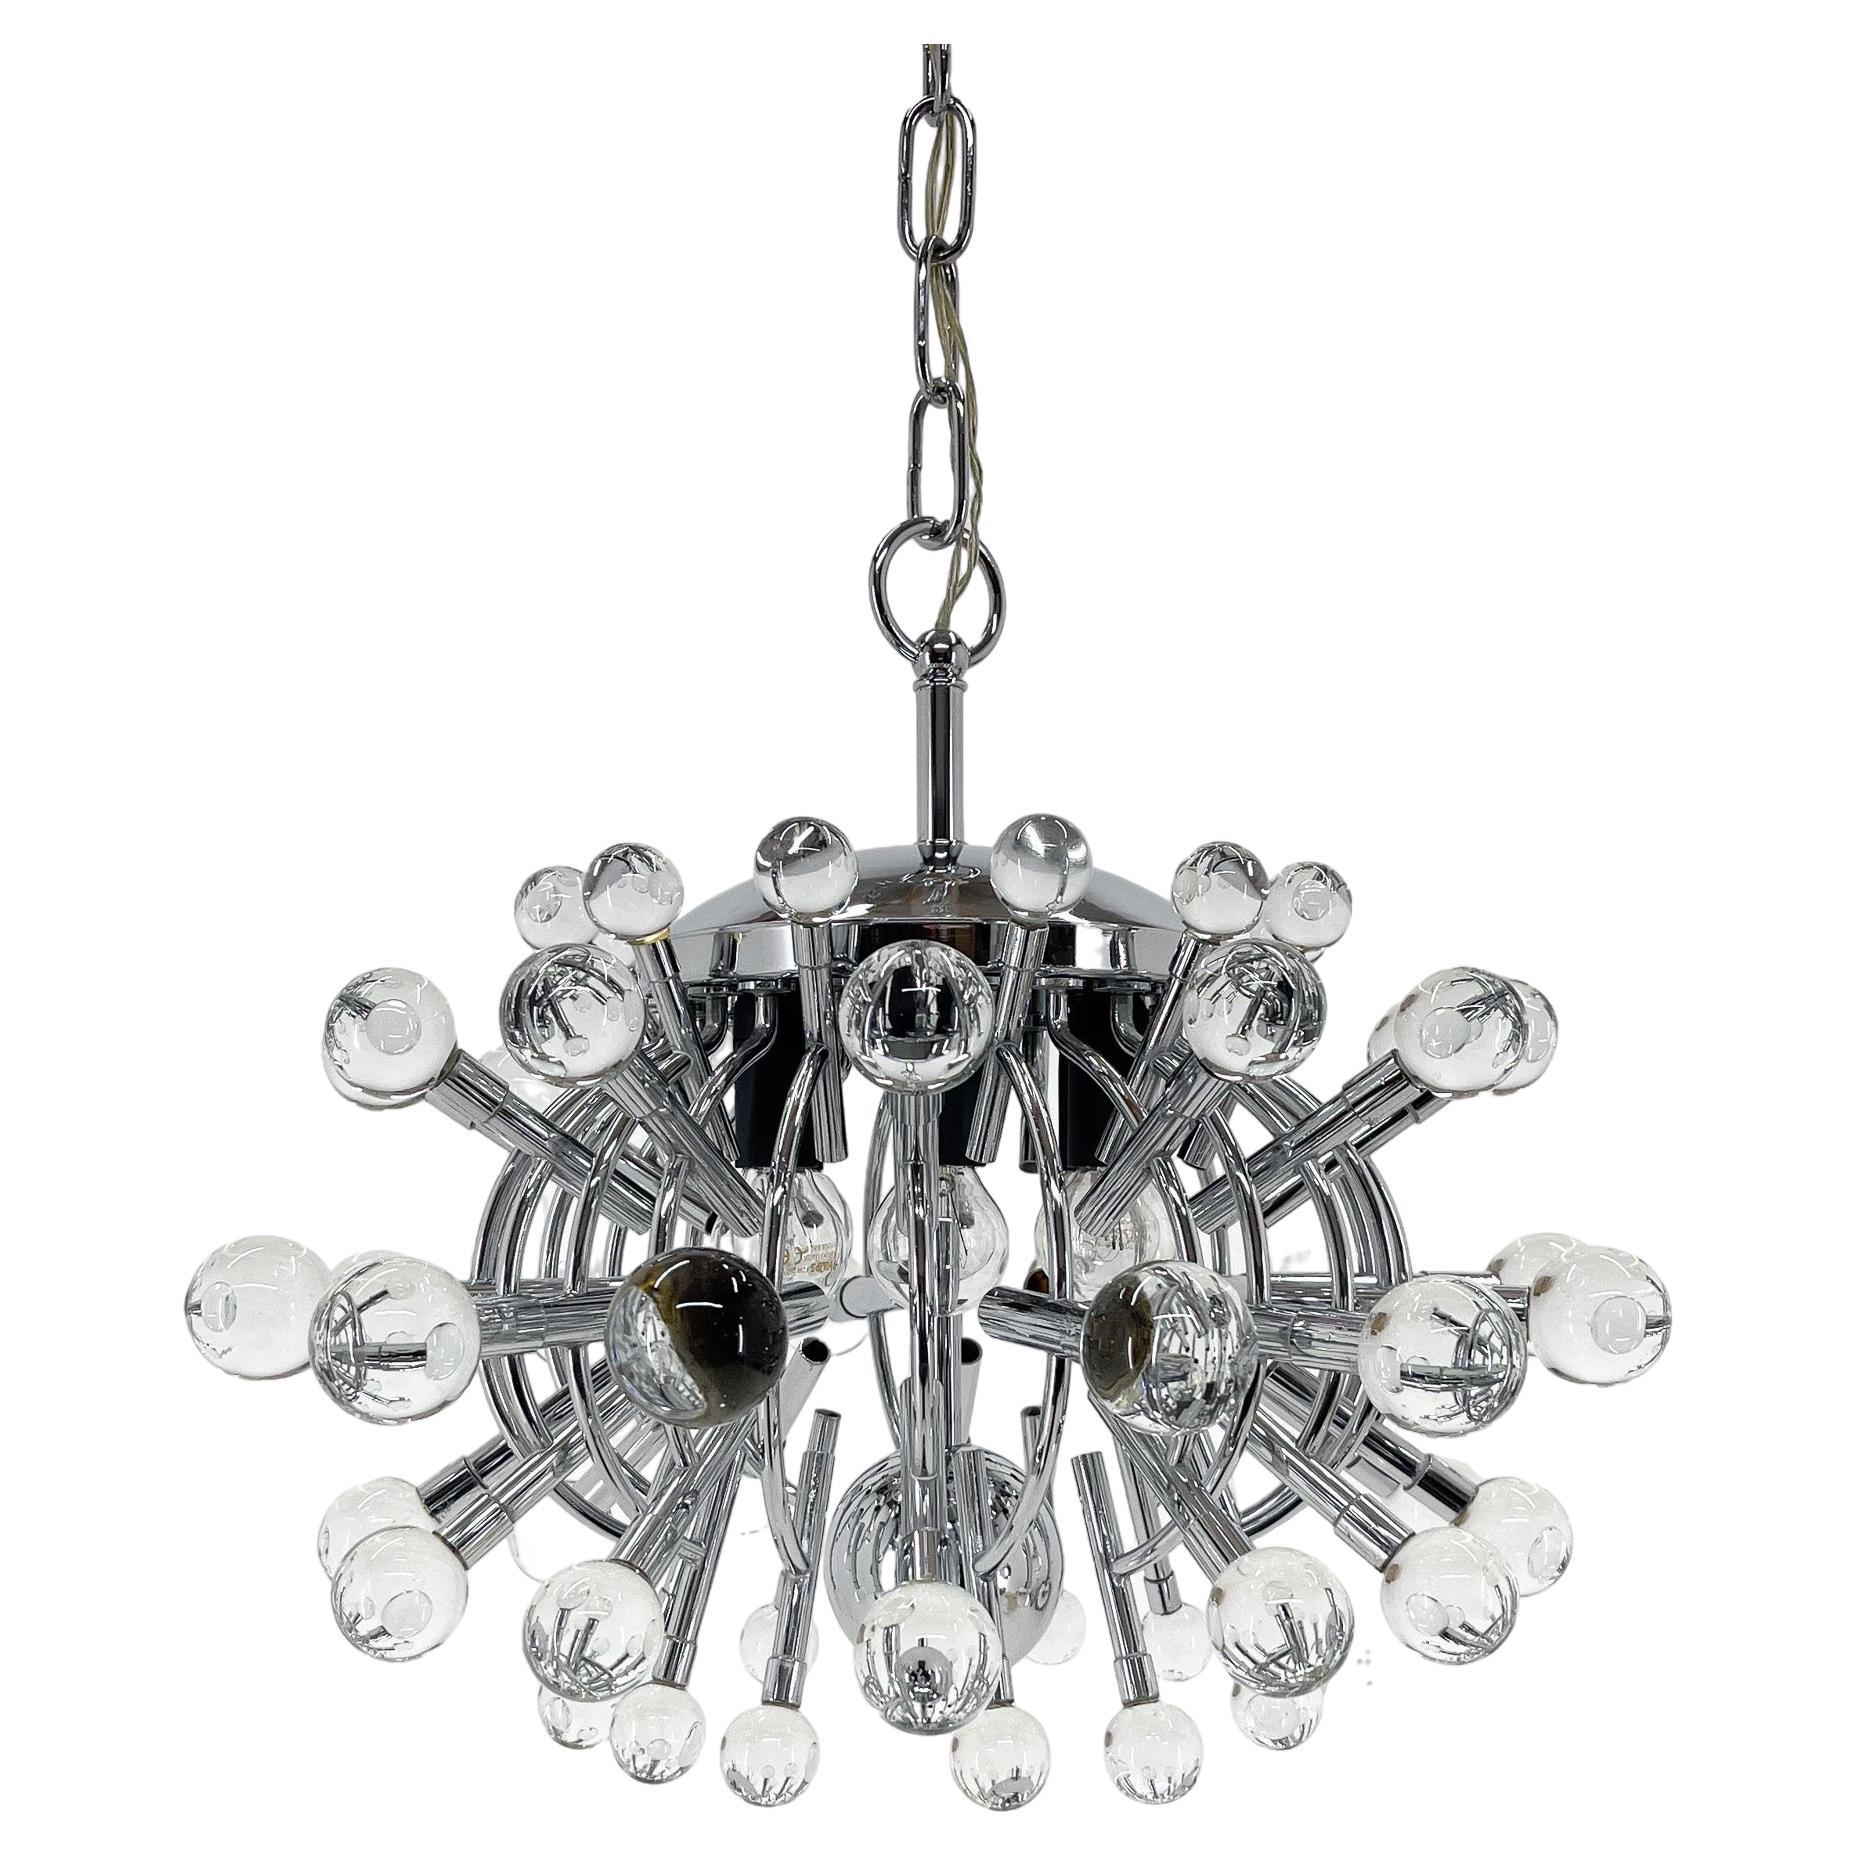 Unique Italian Space Age Chrome & Crystal Glass Chandelier, 1970s